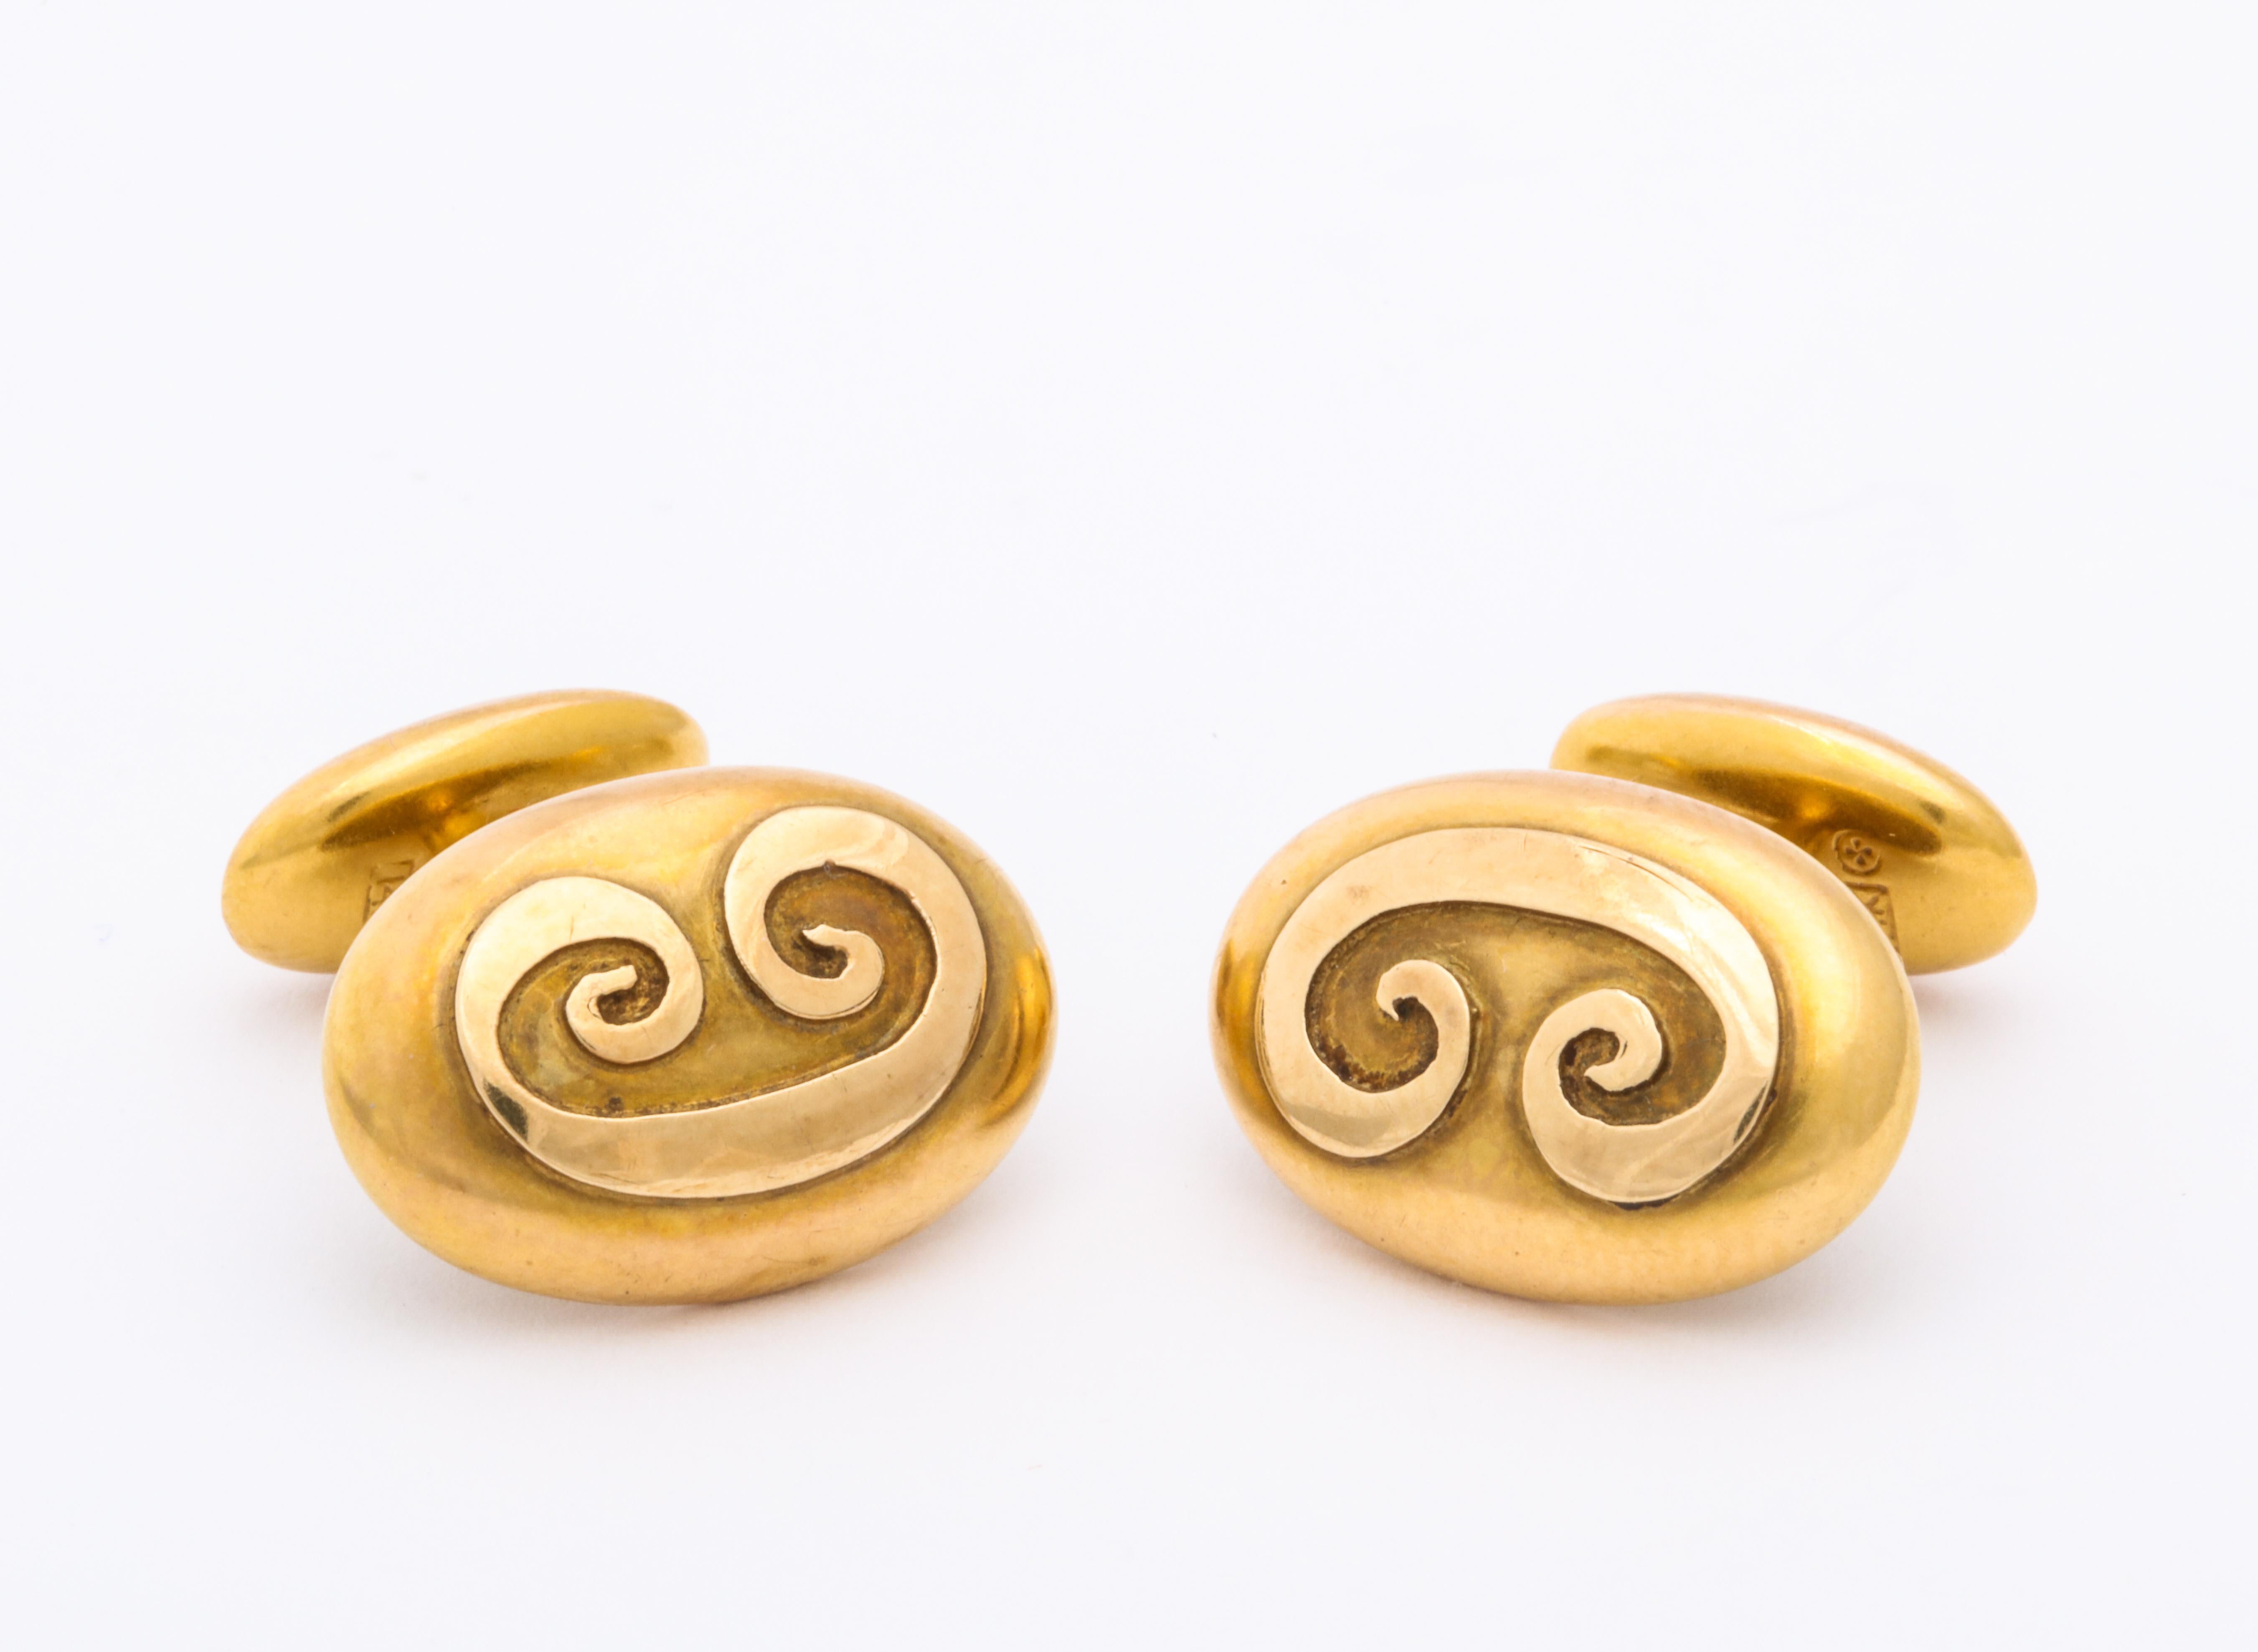 Made in America, one-half inch wide oval links are 14 Kt gold and were made between 1900 and 1915. 
A double sided scroll is engraved in relief on the negative space. The back end is oval and just the right size to easily insert into a cuff.  There